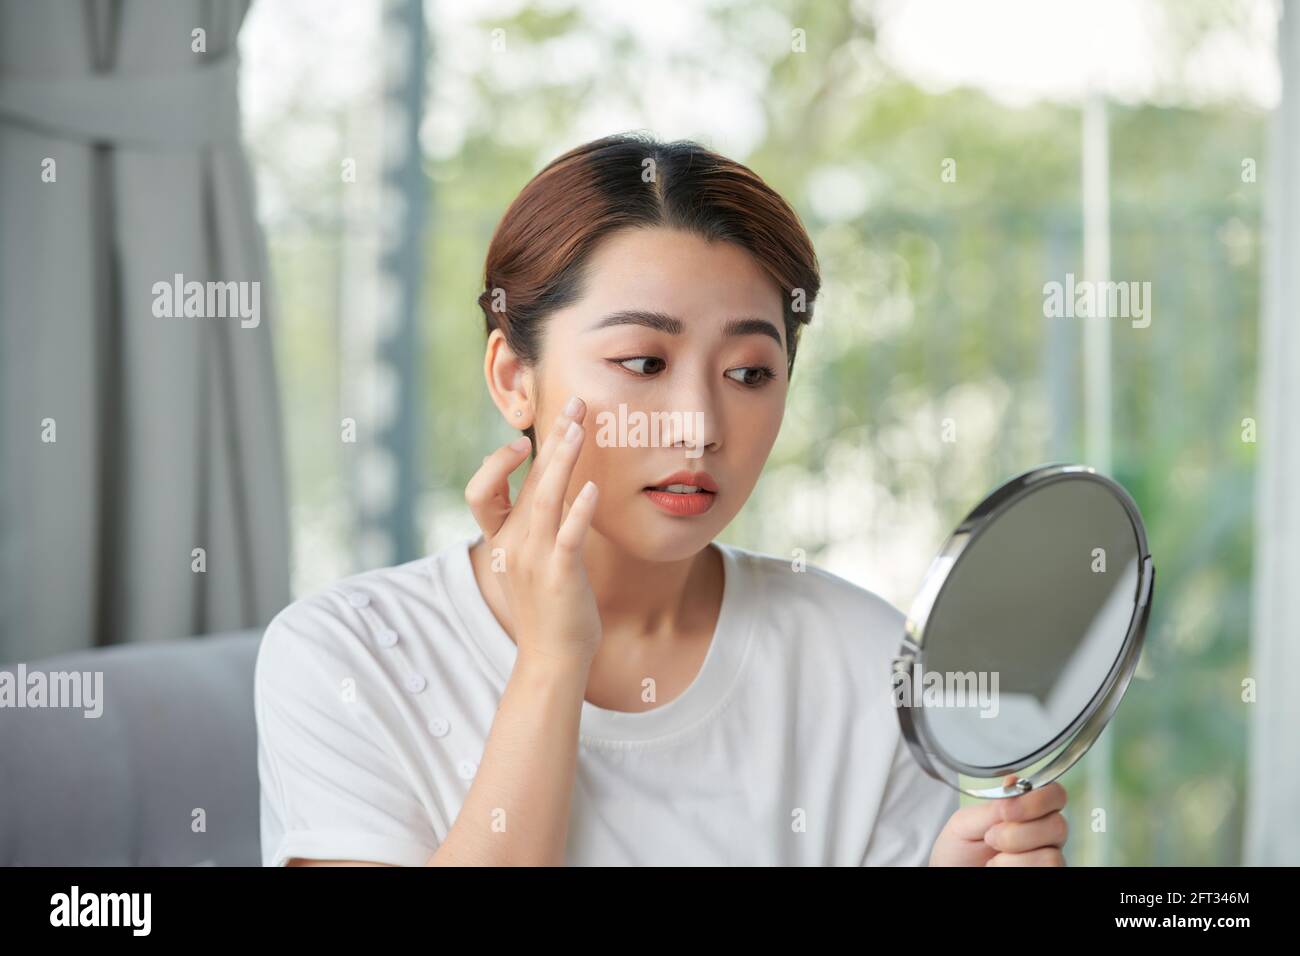 Woman examining her face in the mirror, problematic acne-prone skin concept Stock Photo